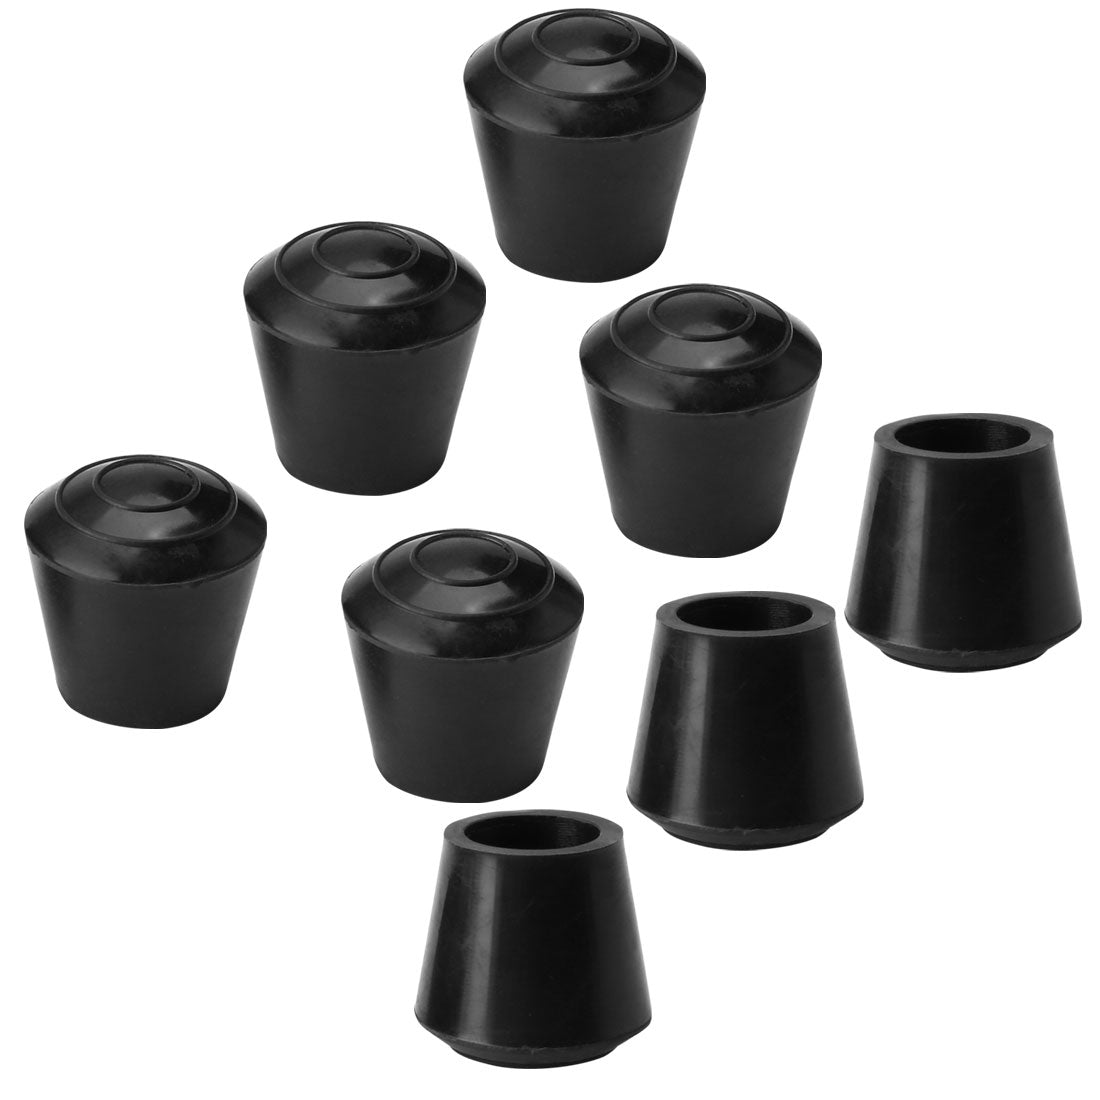 uxcell Uxcell Rubber Leg Cap Tip Cup Feet Cover 10mm 3/8" Inner Dia 8pcs for Furniture Chair